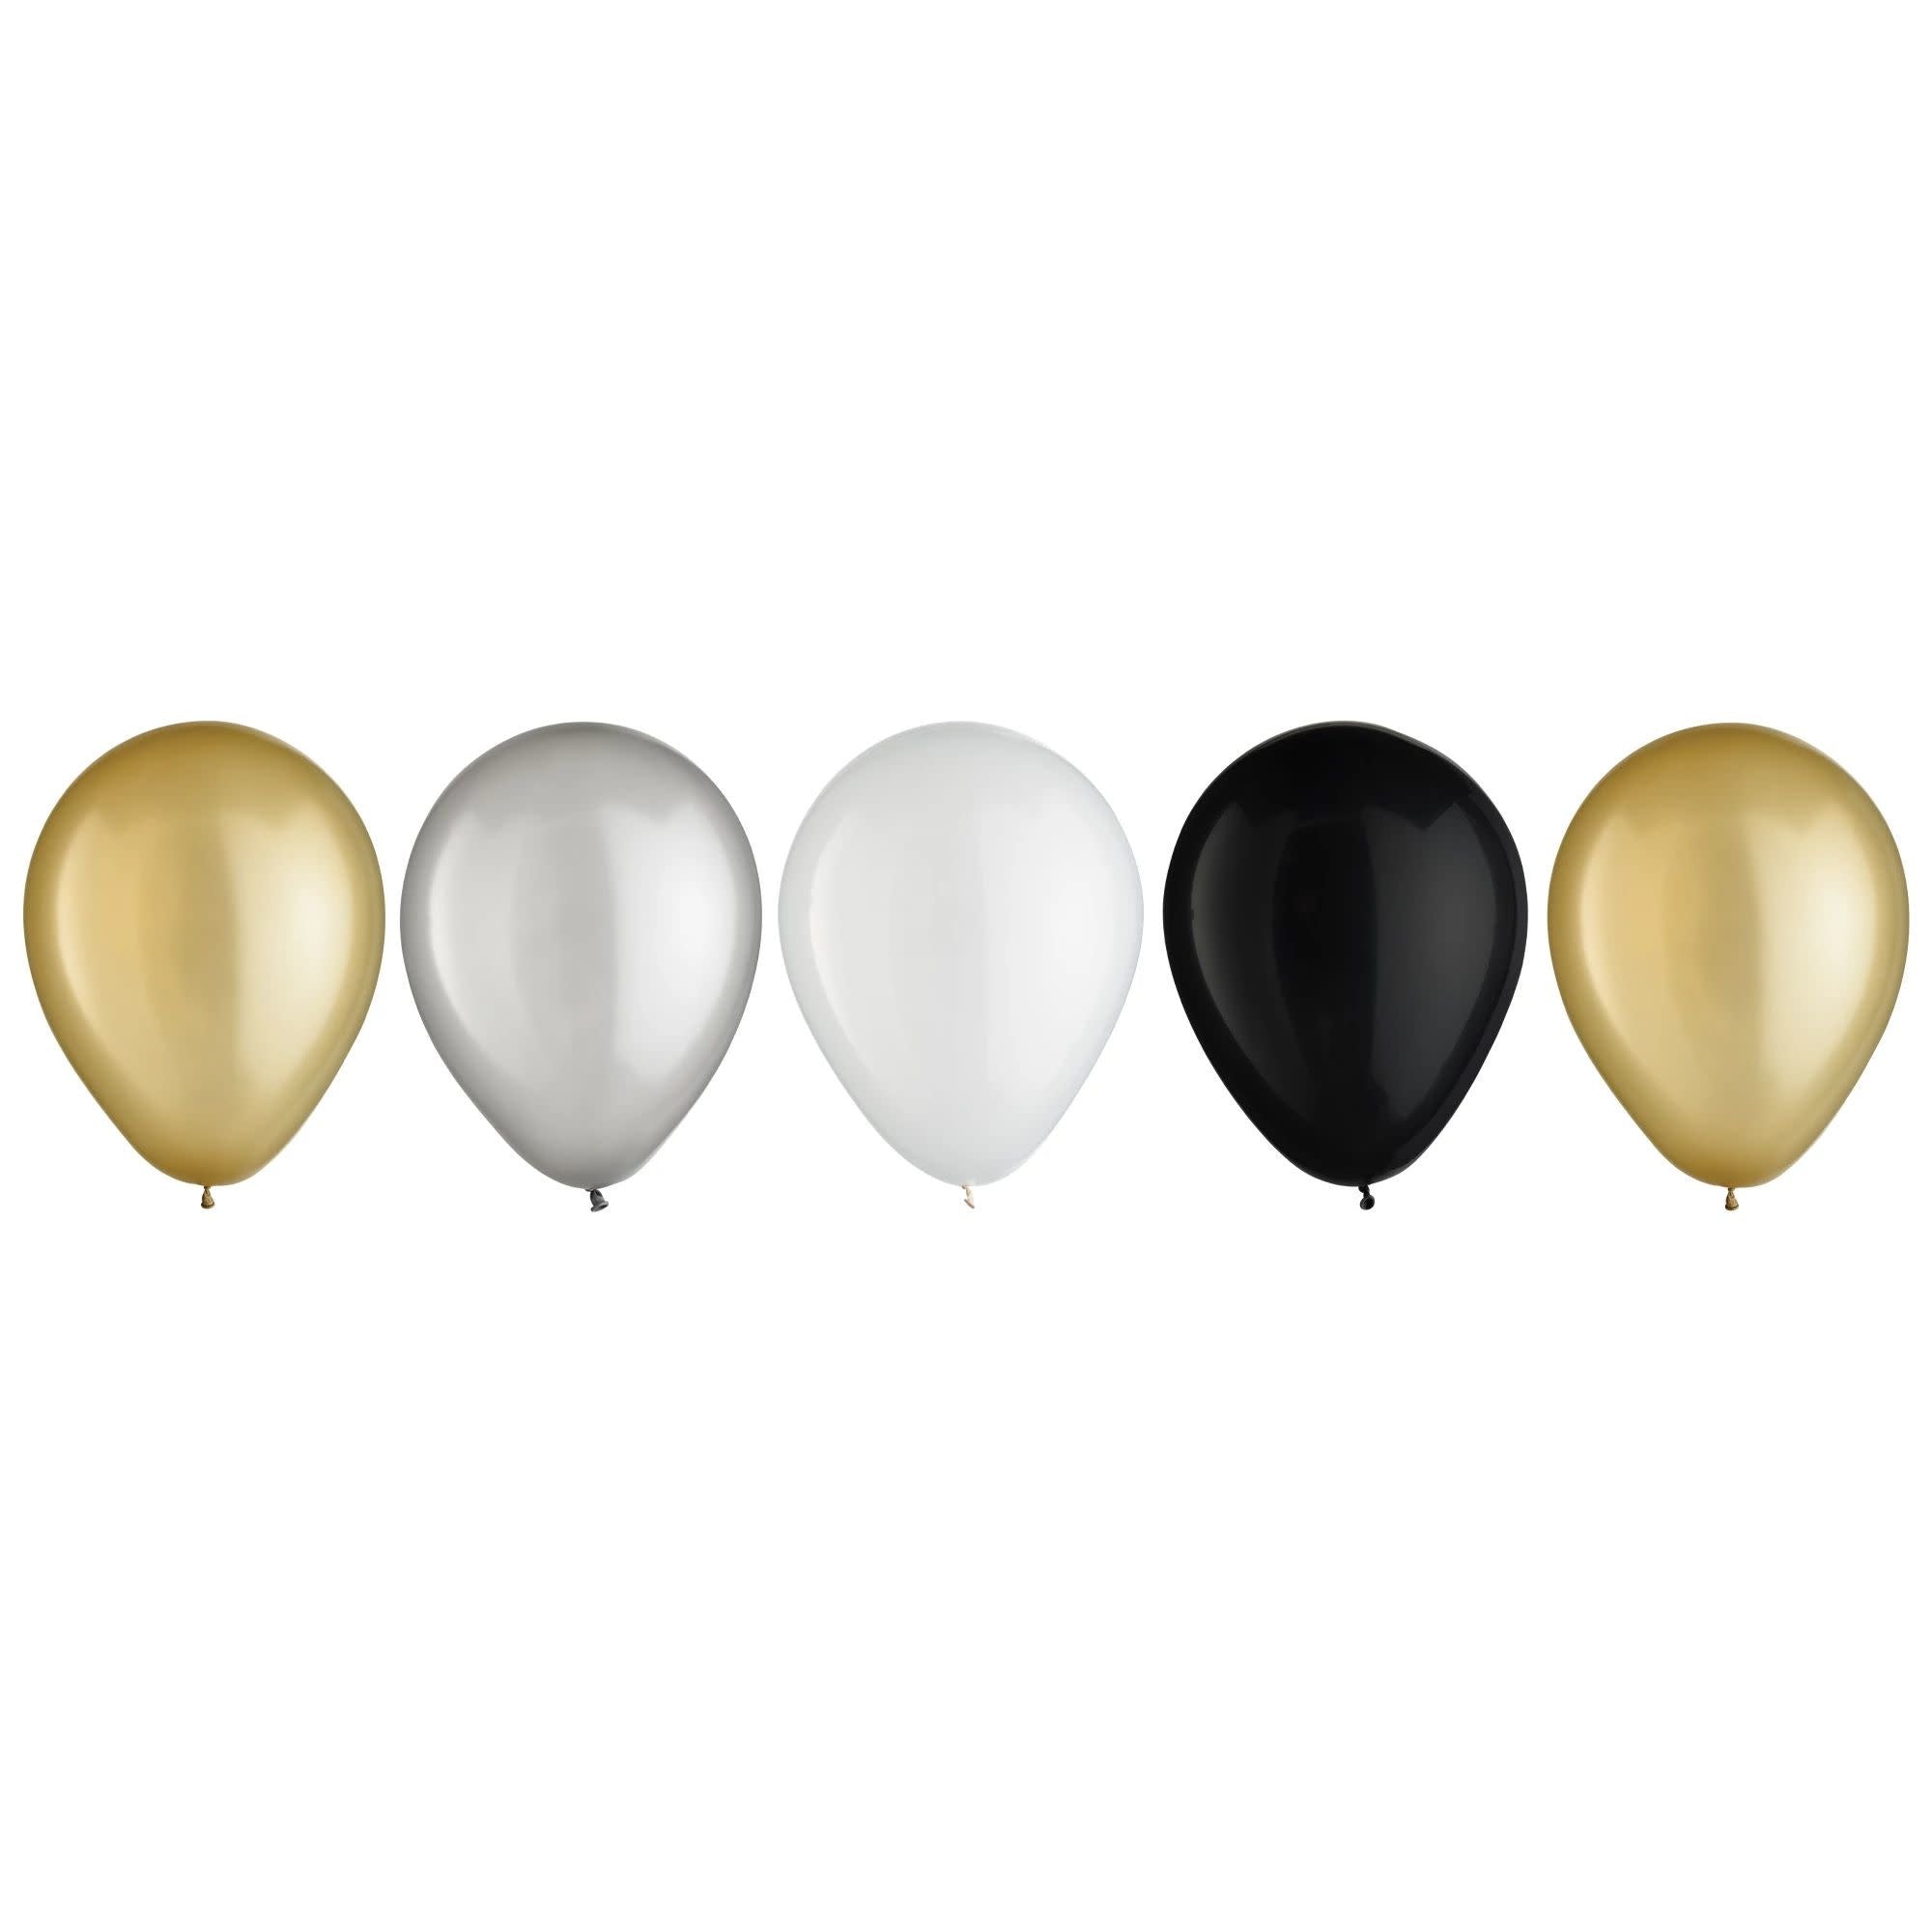 Luxe Latex Balloons Assortments 11in, 15pcs